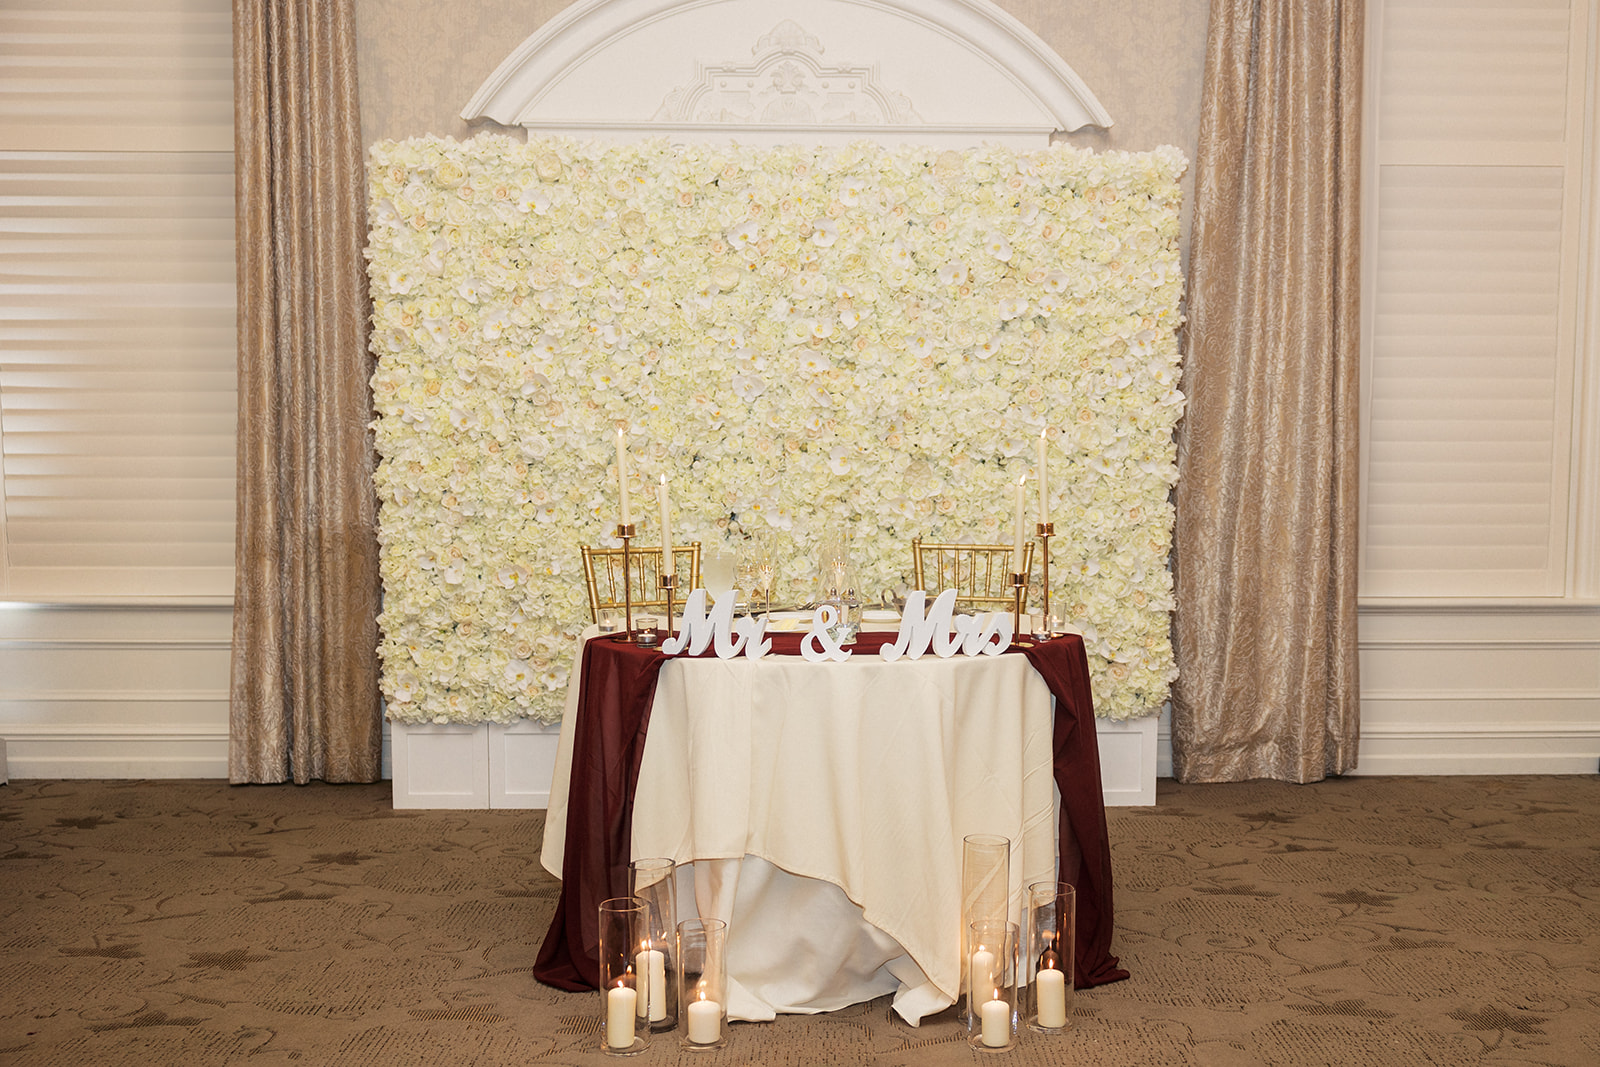 Details of a head table set up for a The Belle of Blue Bell wedding reception with a large floral wall